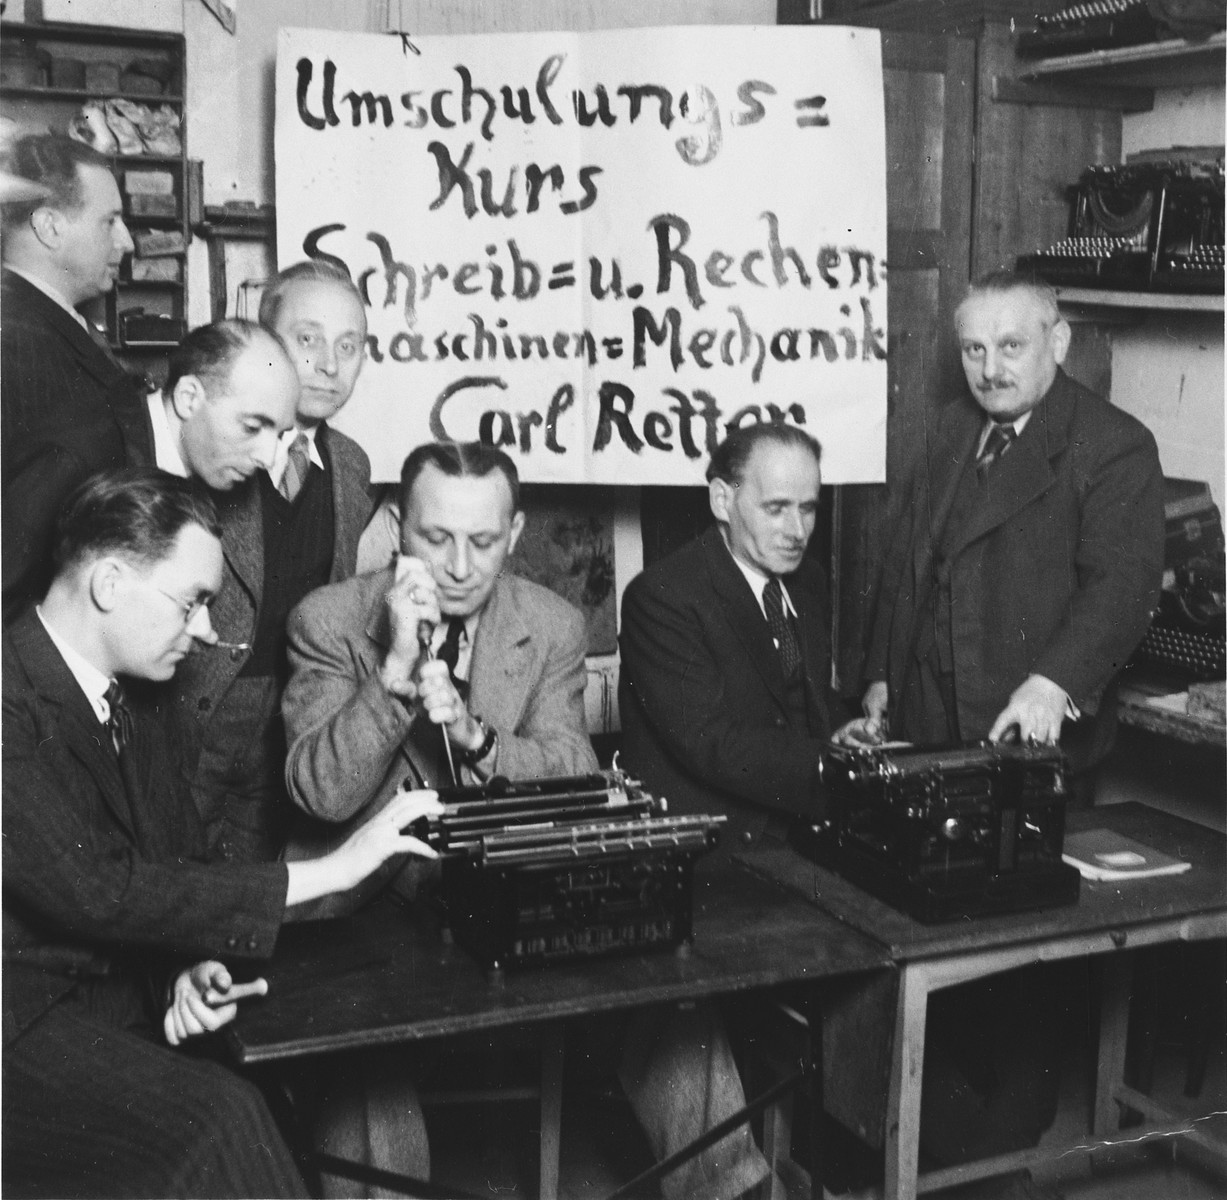 Viennese Jews learn typewriting repair in an ORT vocational school following the Nazi take-over of Austria.

Franz Edelschein is pictured third from the left.